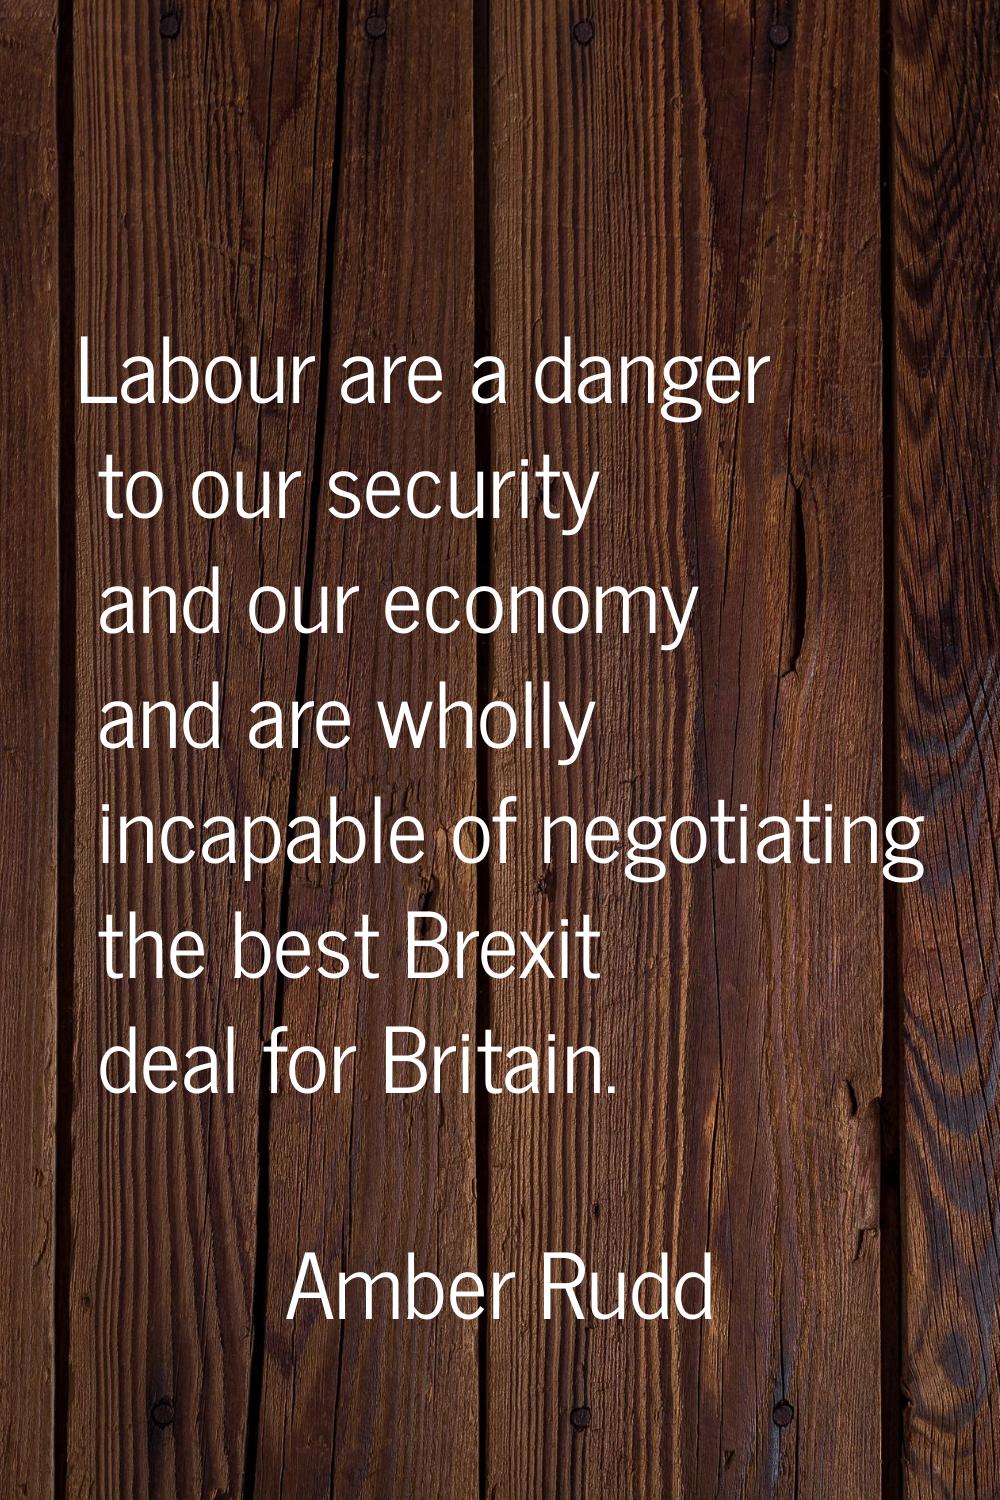 Labour are a danger to our security and our economy and are wholly incapable of negotiating the bes